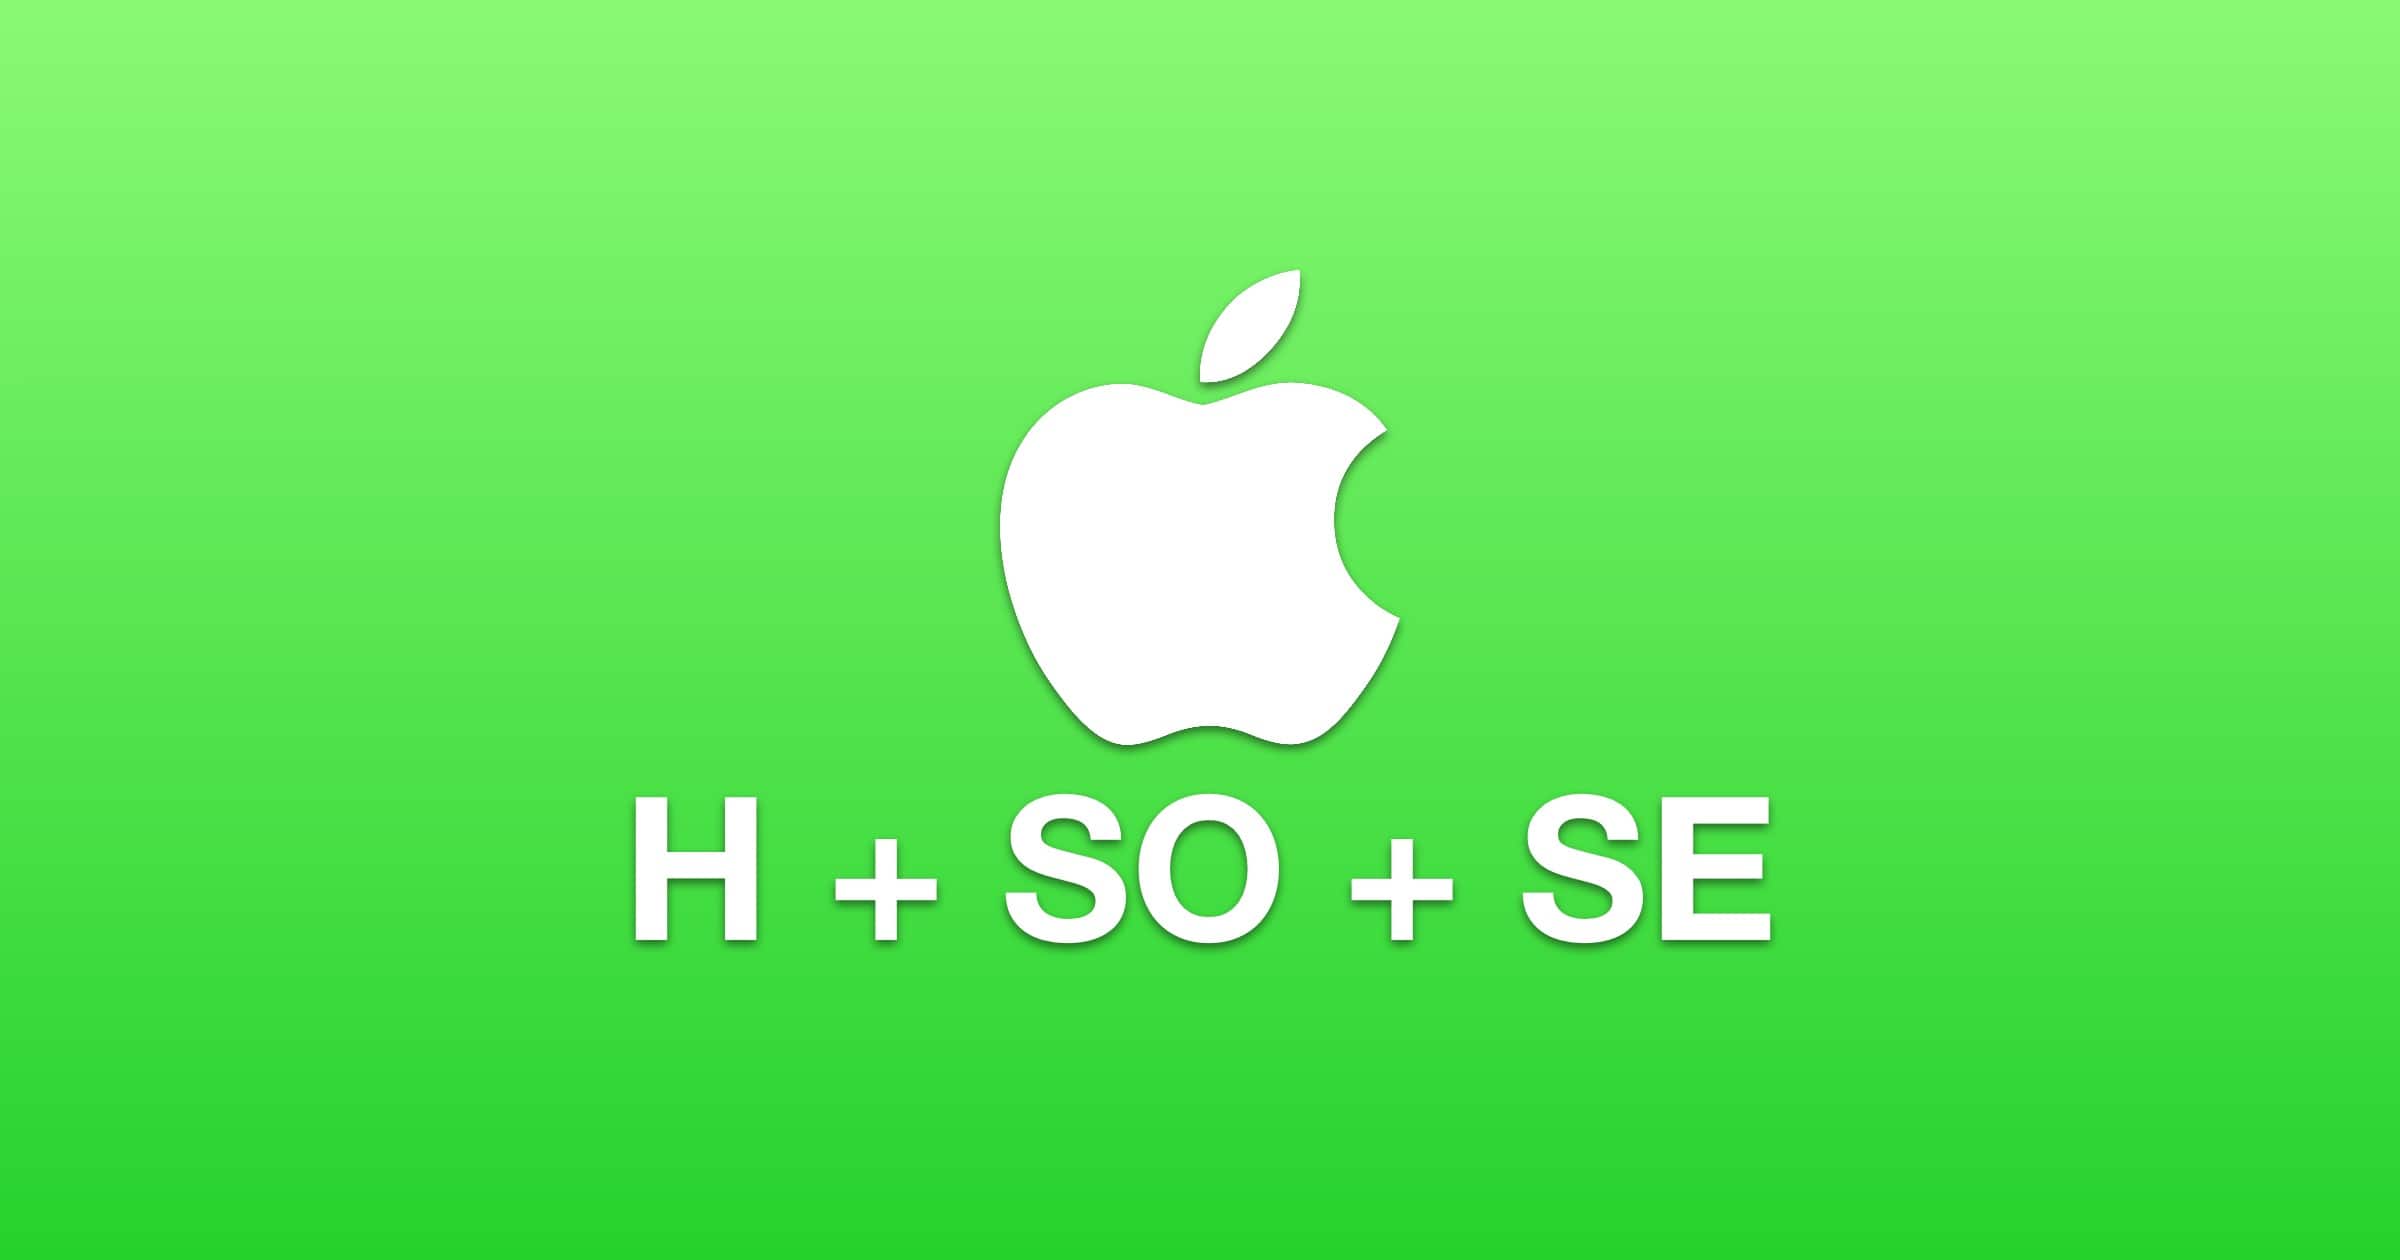 Apple hardware software services